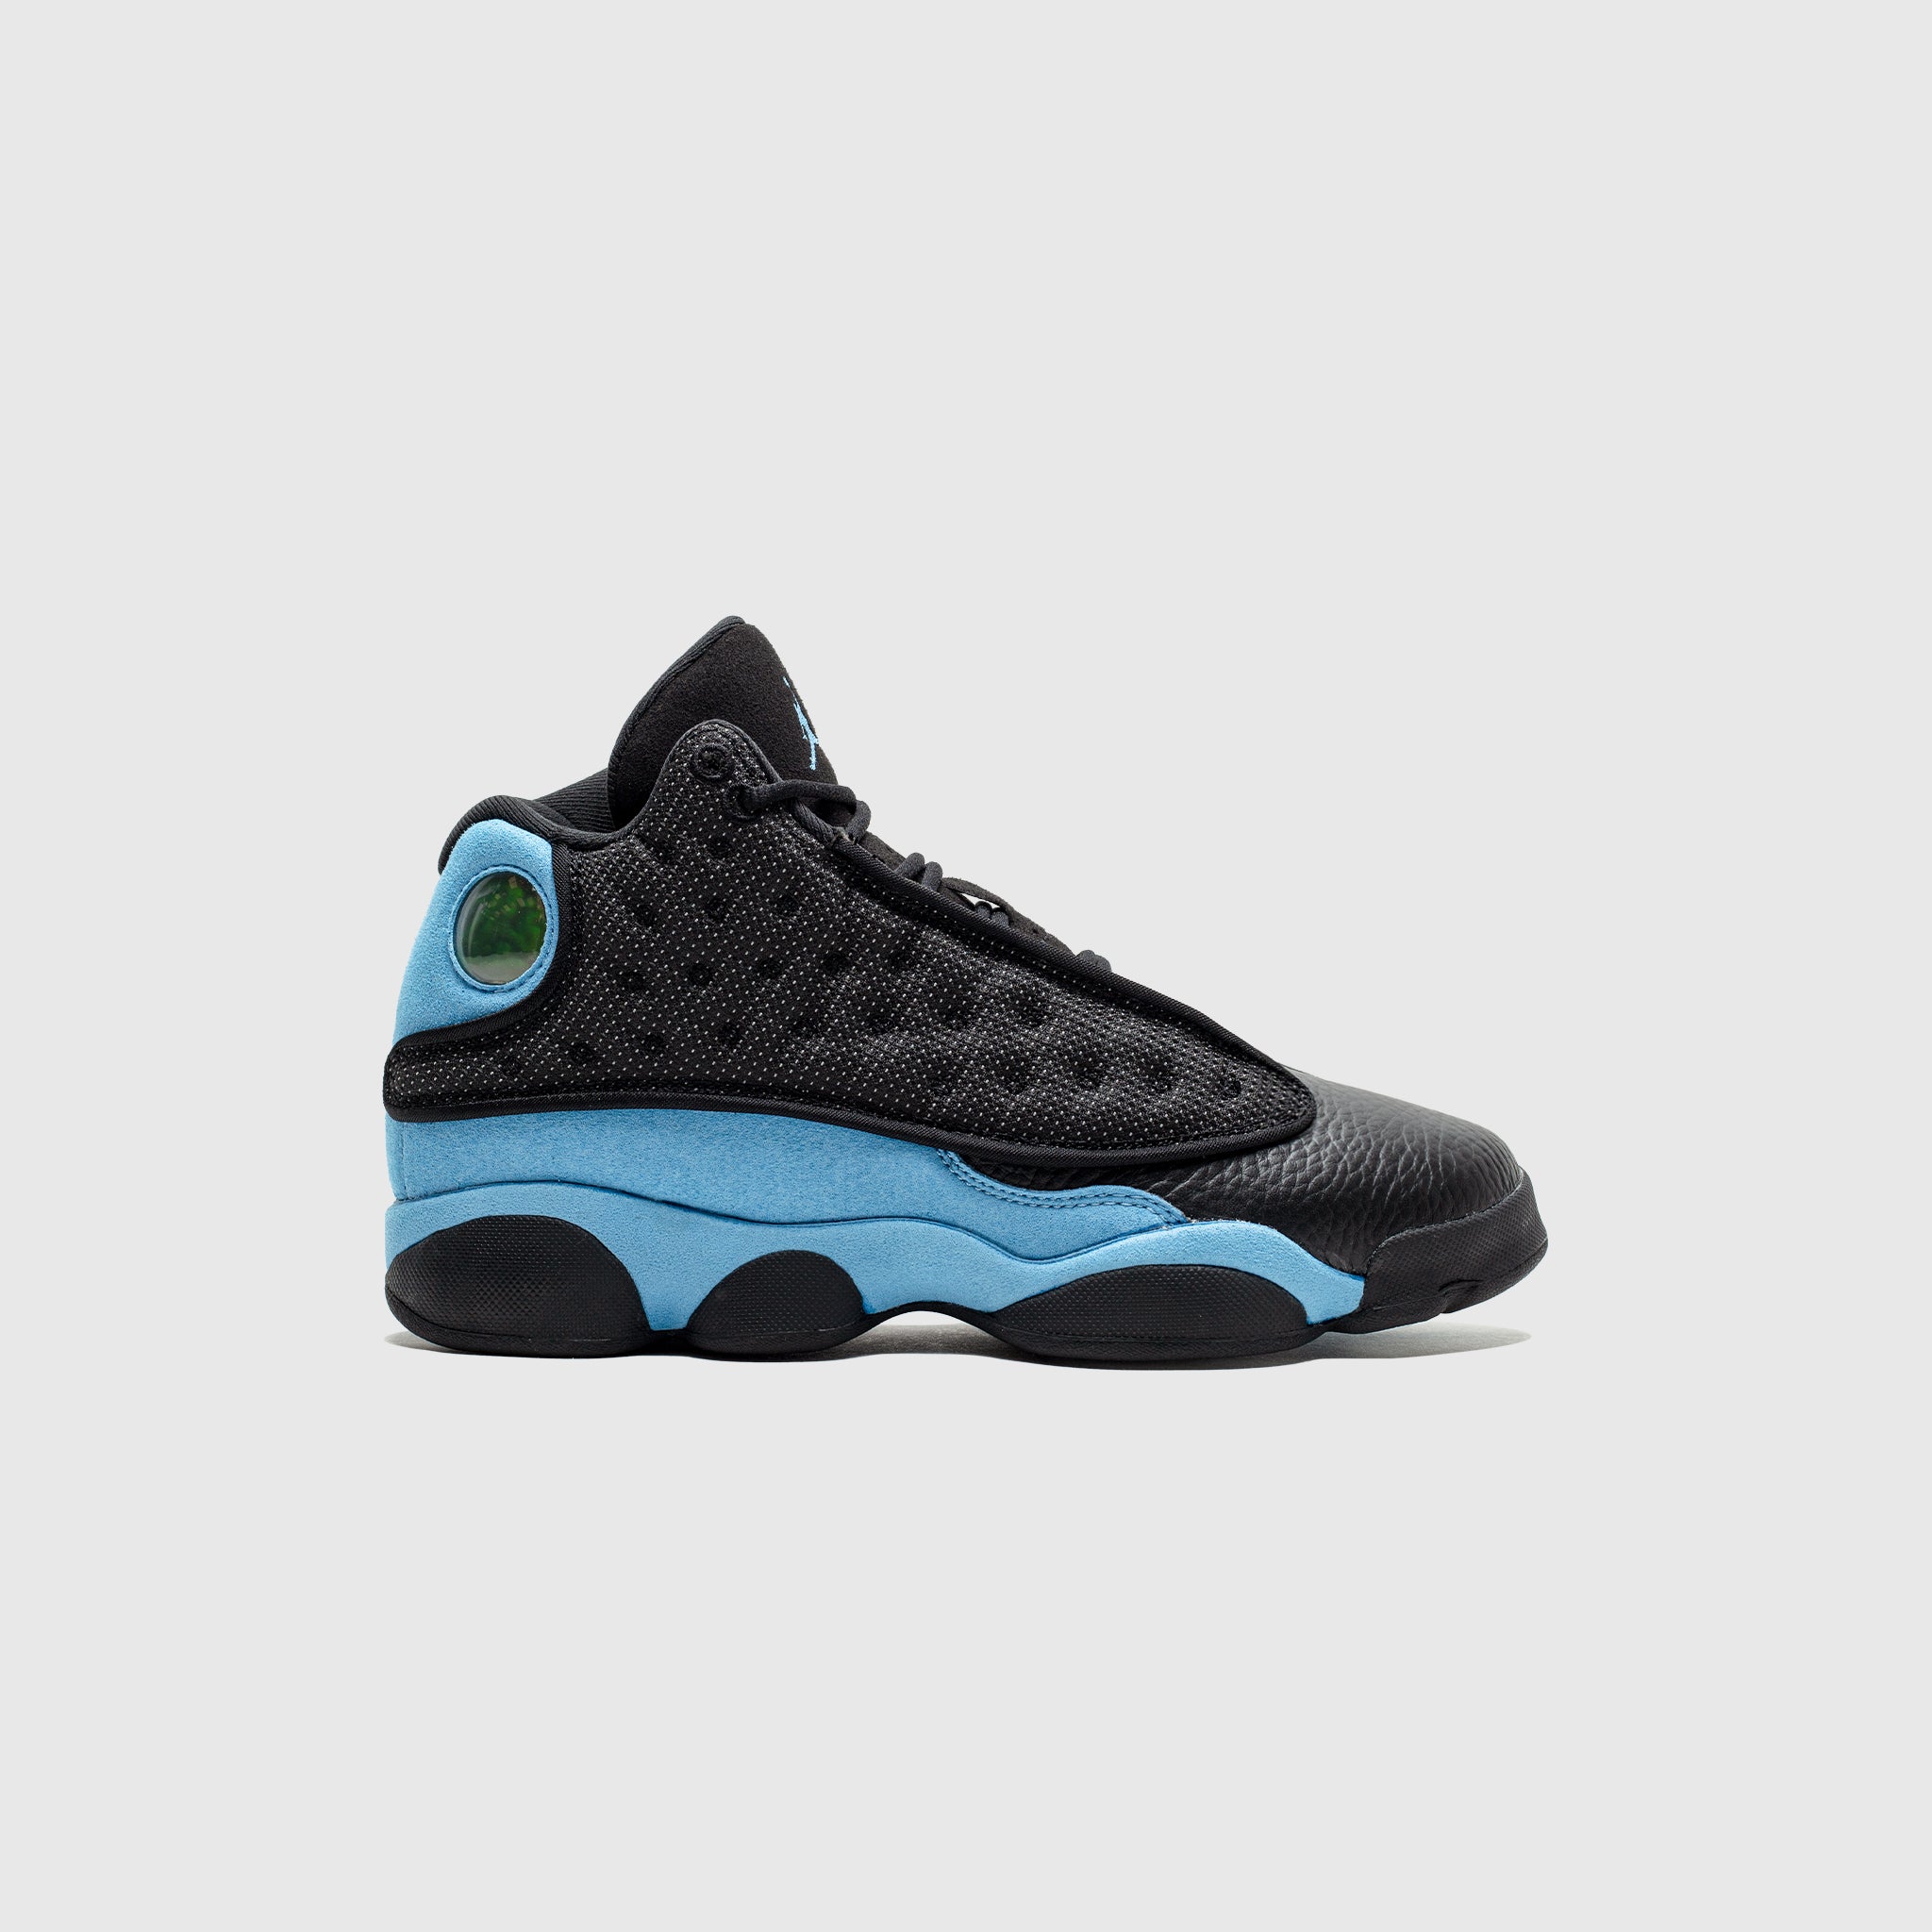 black and turquoise jordans 13